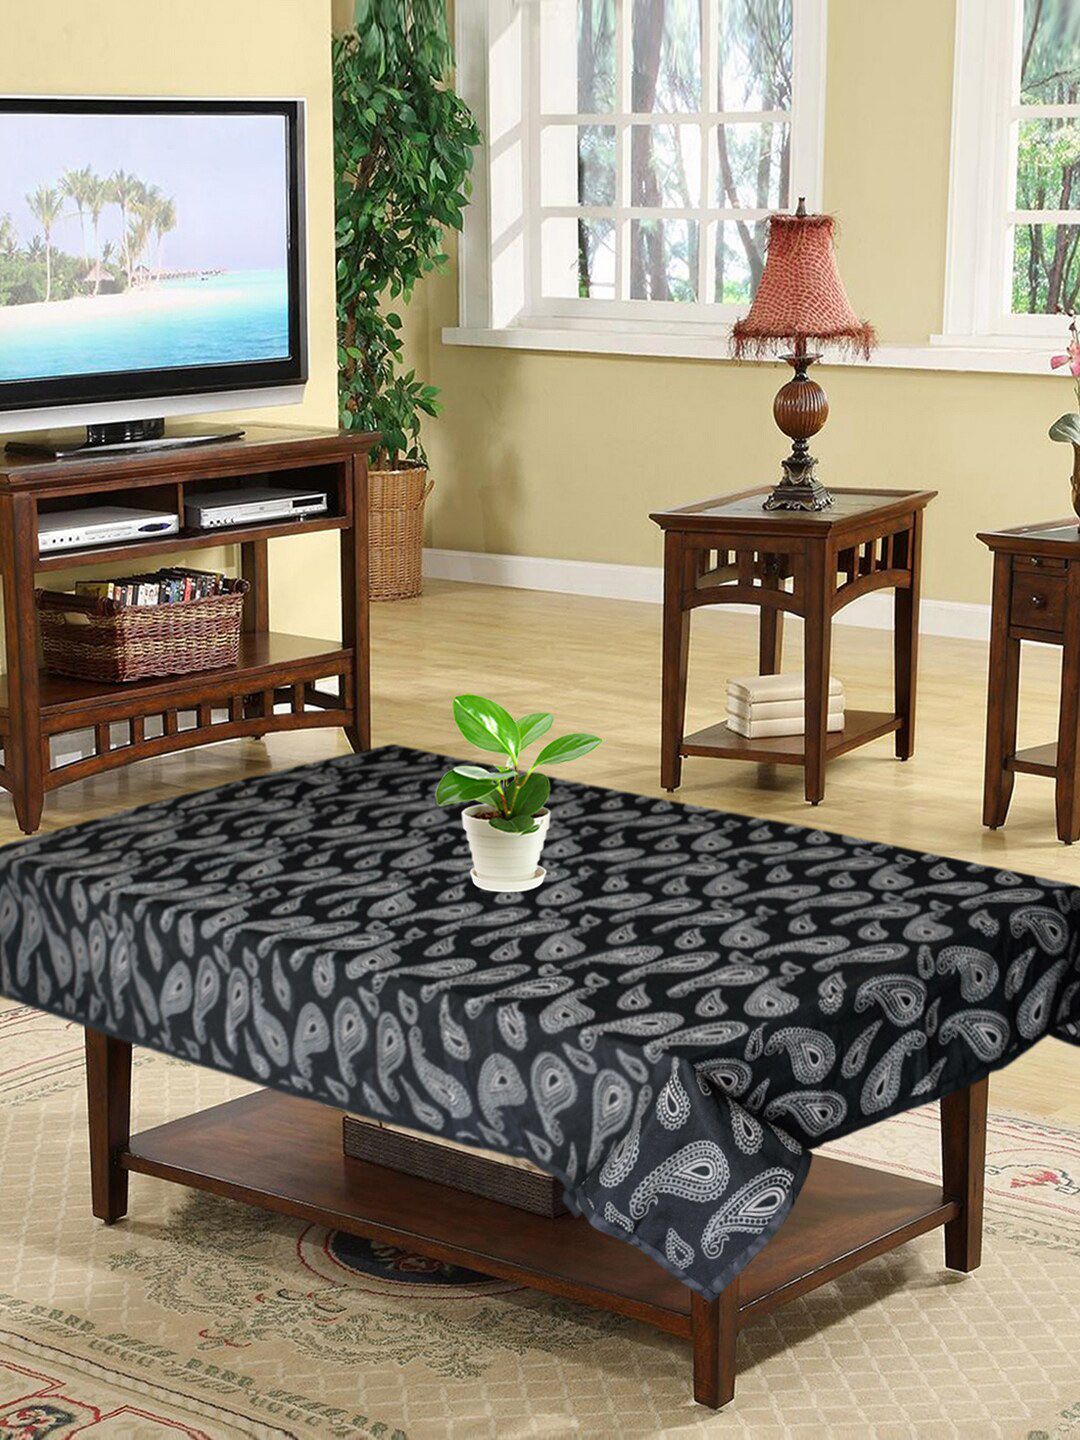 Kuber Industries Black Printed Rectangle Cotton Table Covers Price in India